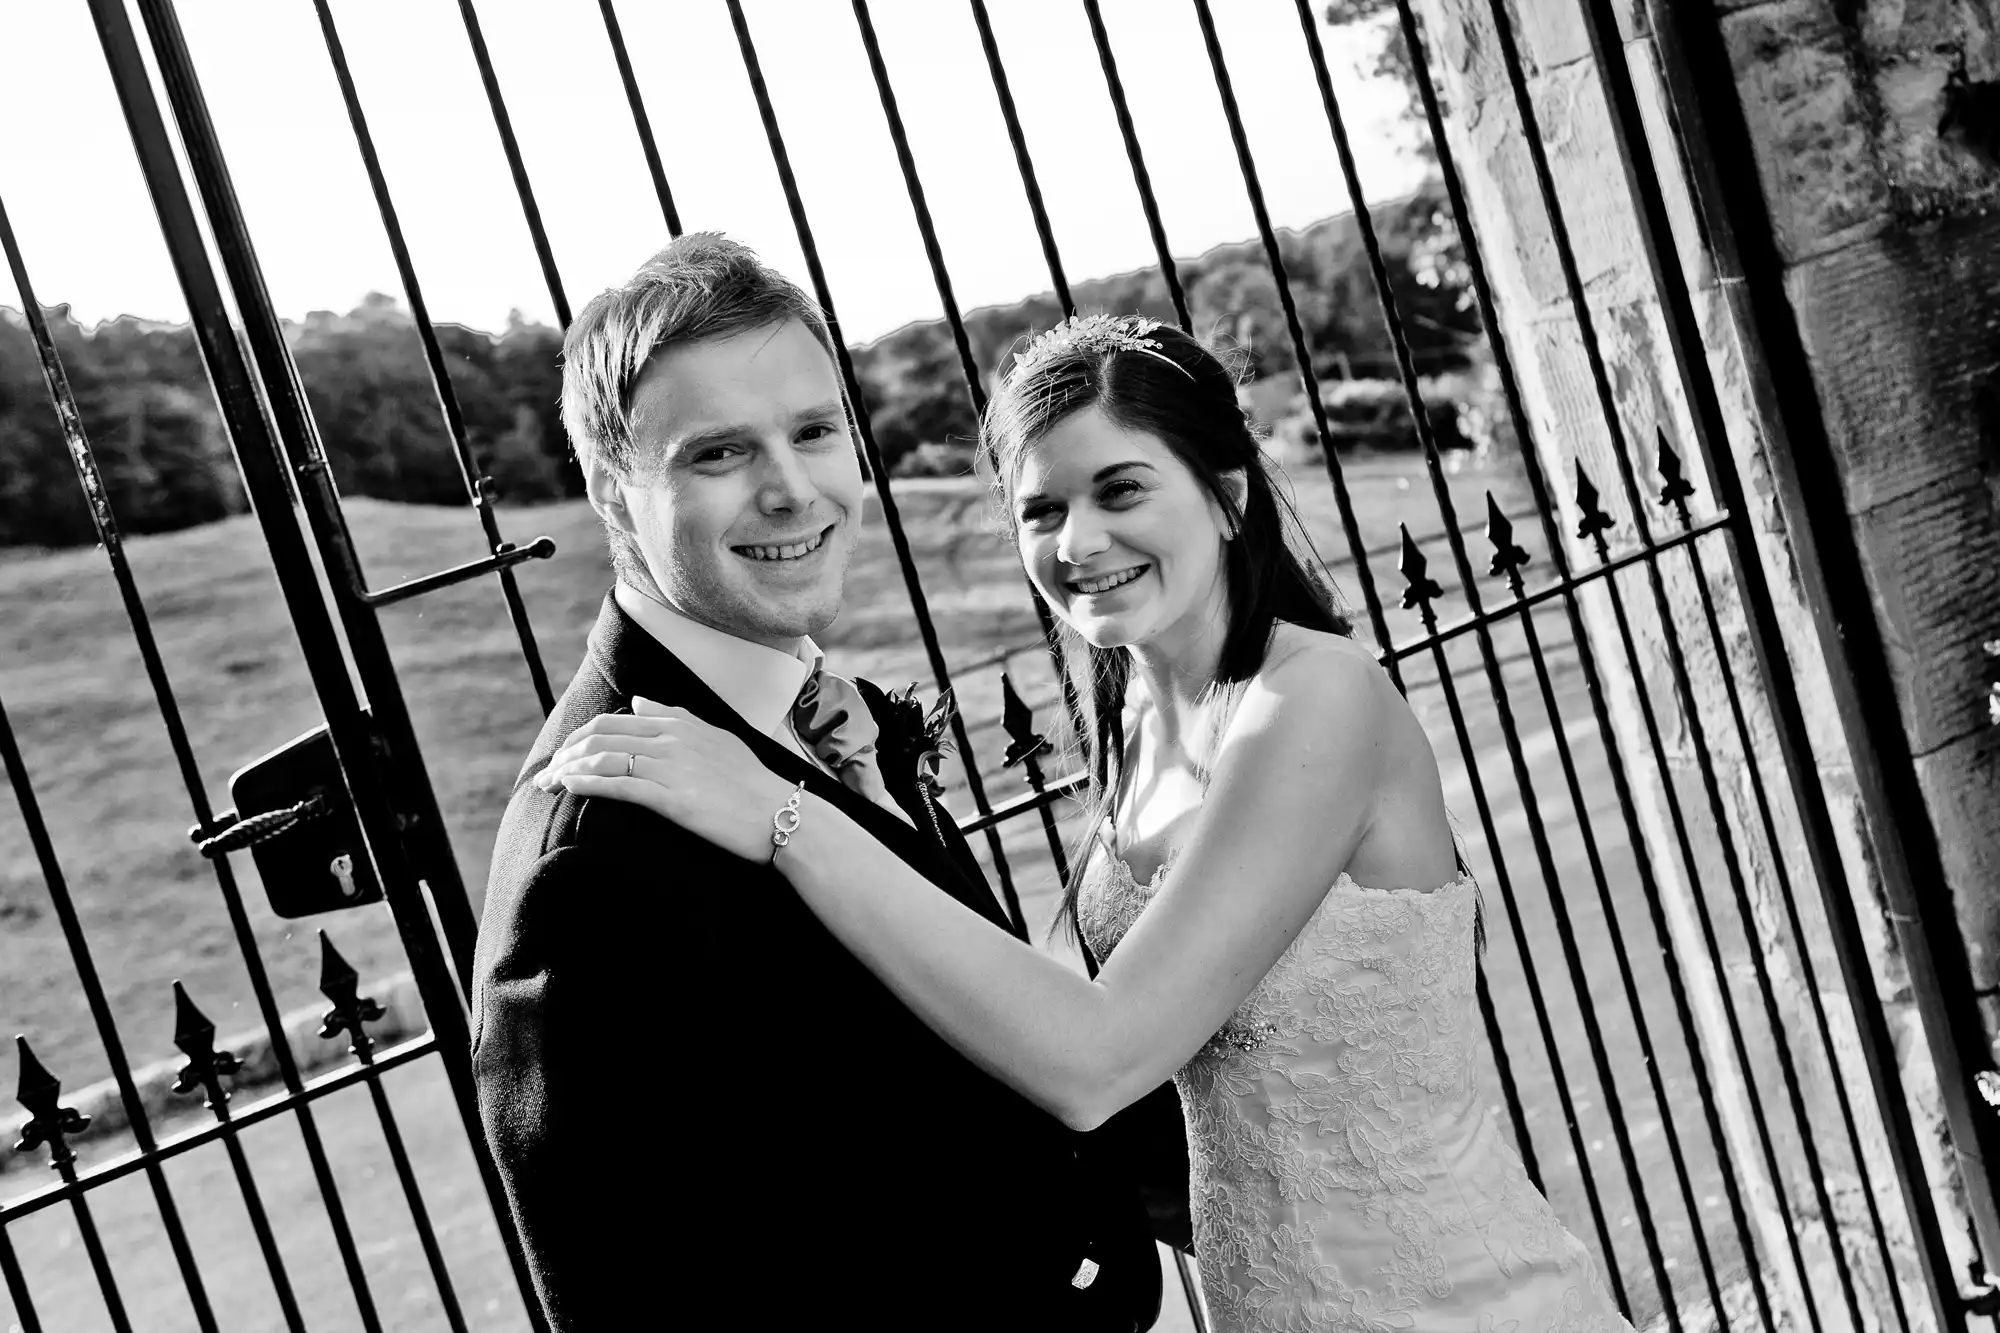 A bride and groom smiling, embracing near a metal gate, in a black and white photograph.